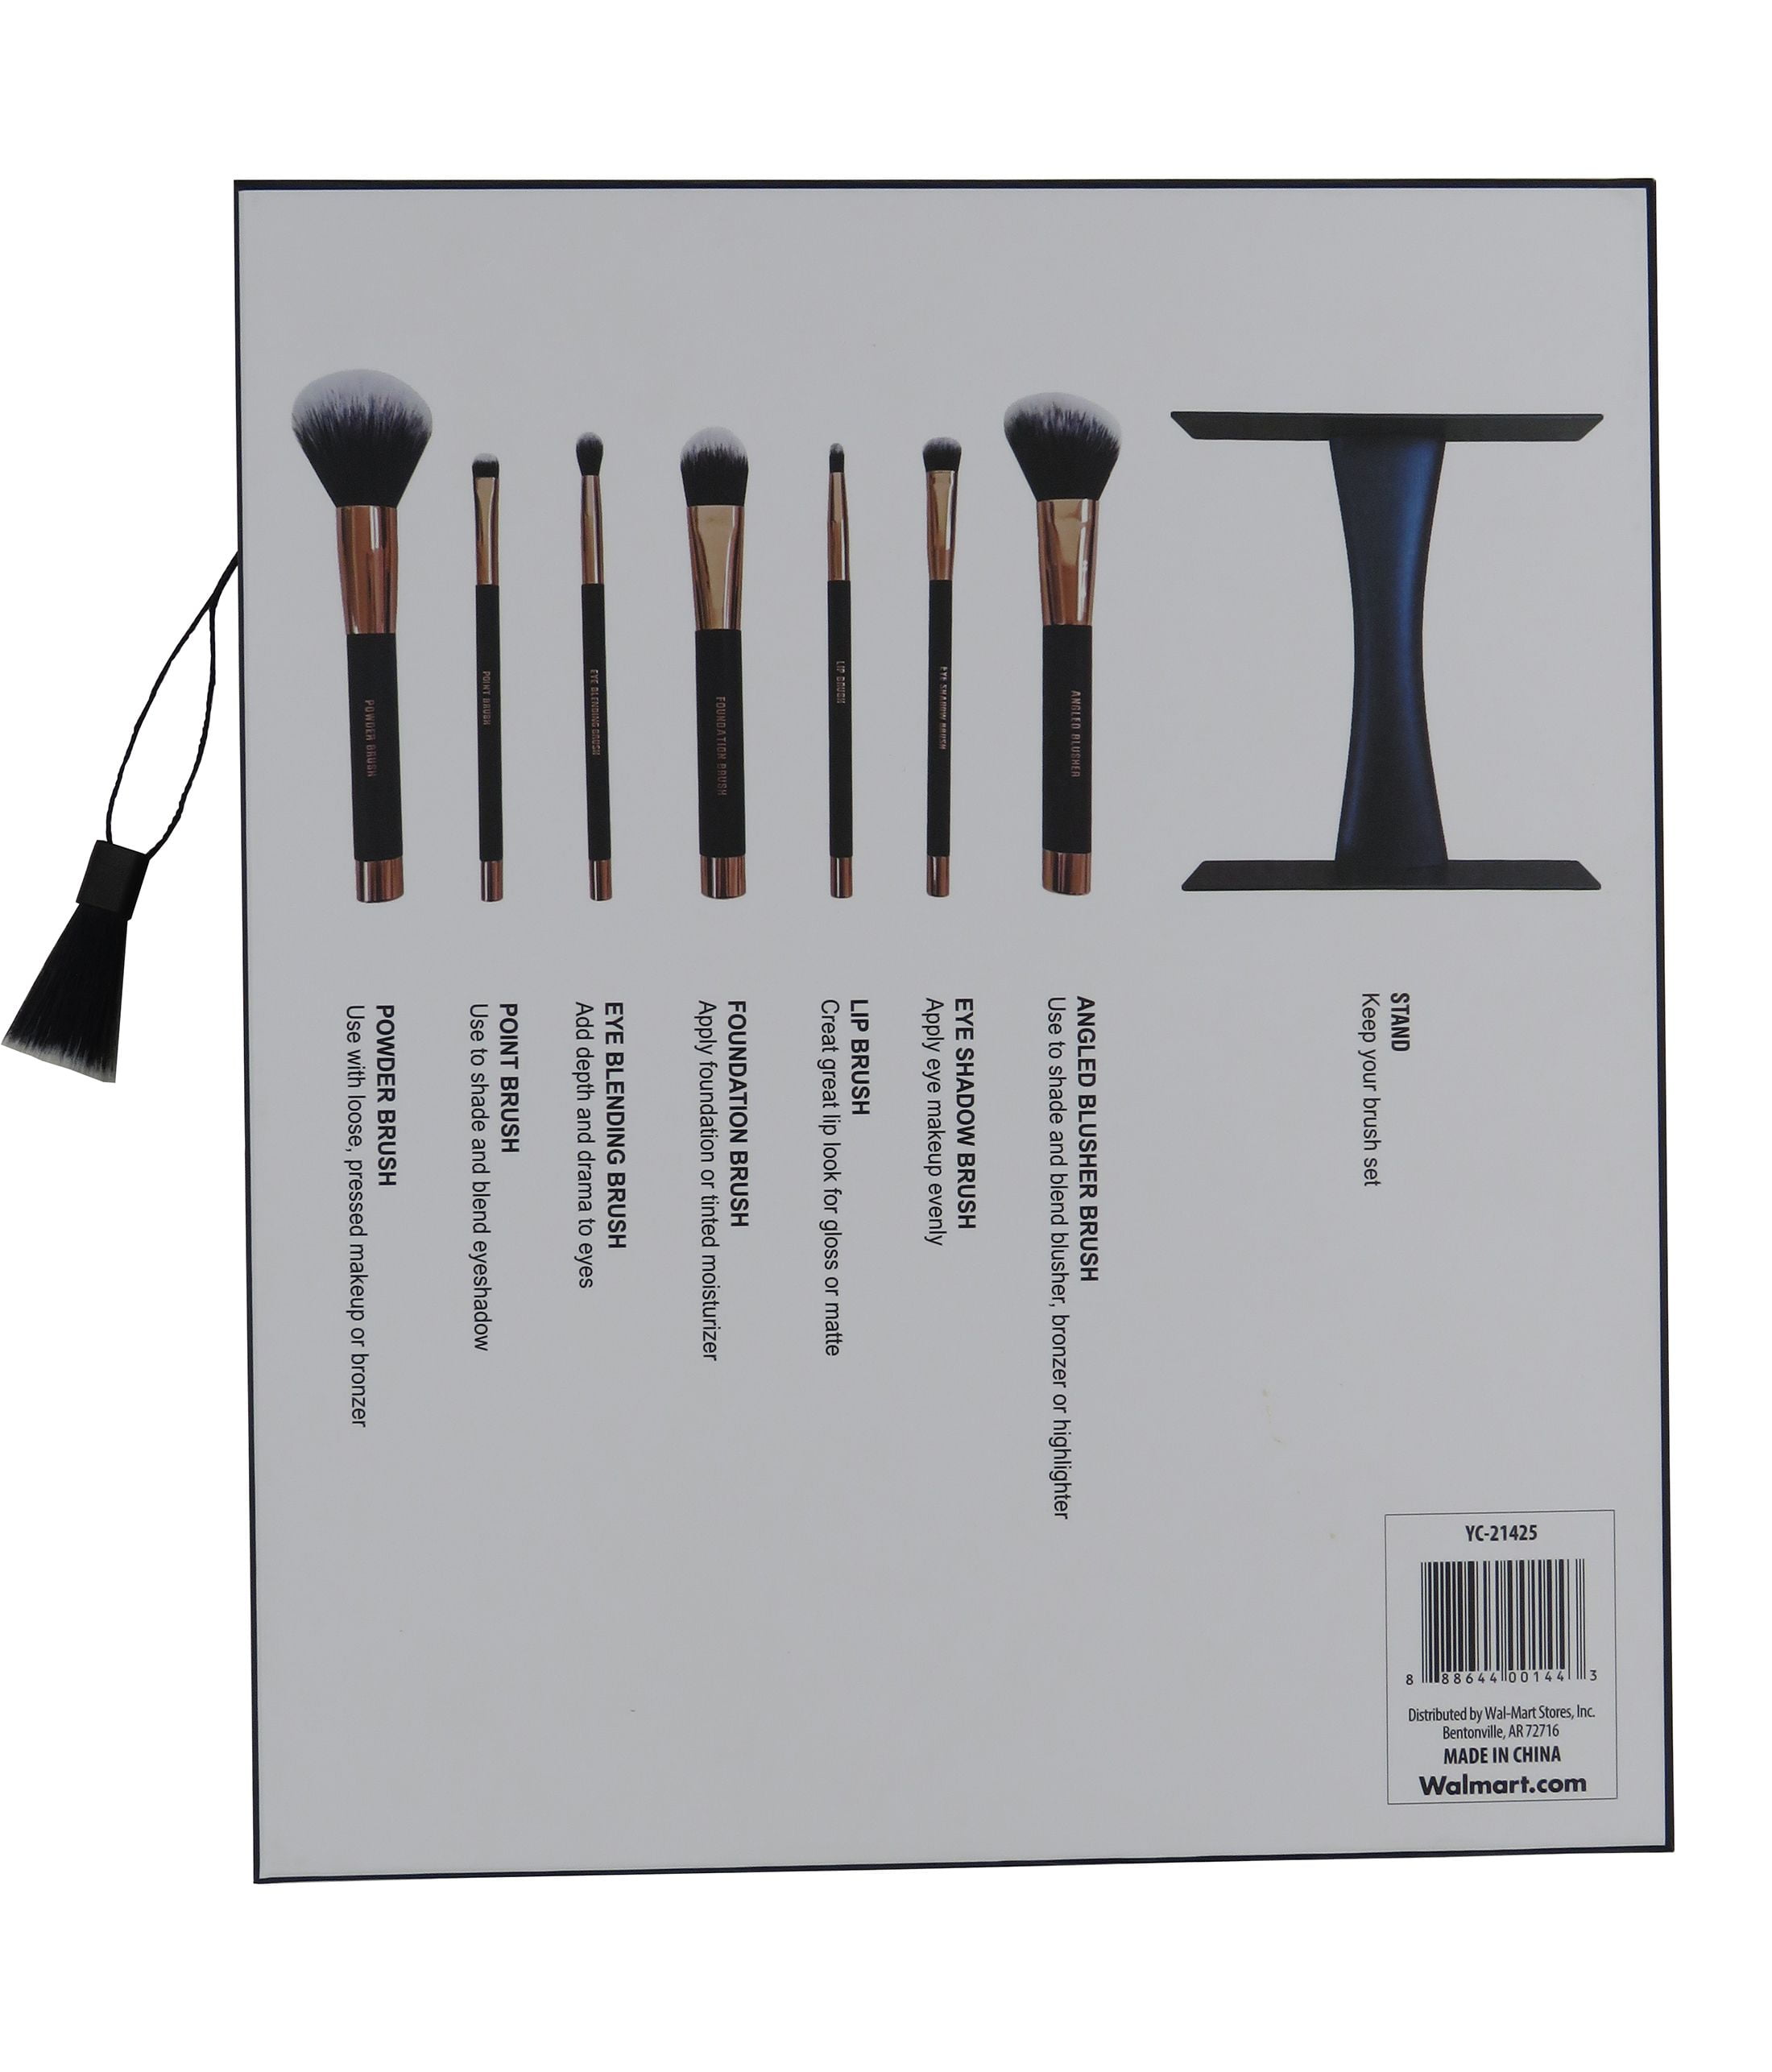 Premium Professional Cosmetic Magnet Brush Gift Set with Standing Holder,  Black, 8 Piece Set 